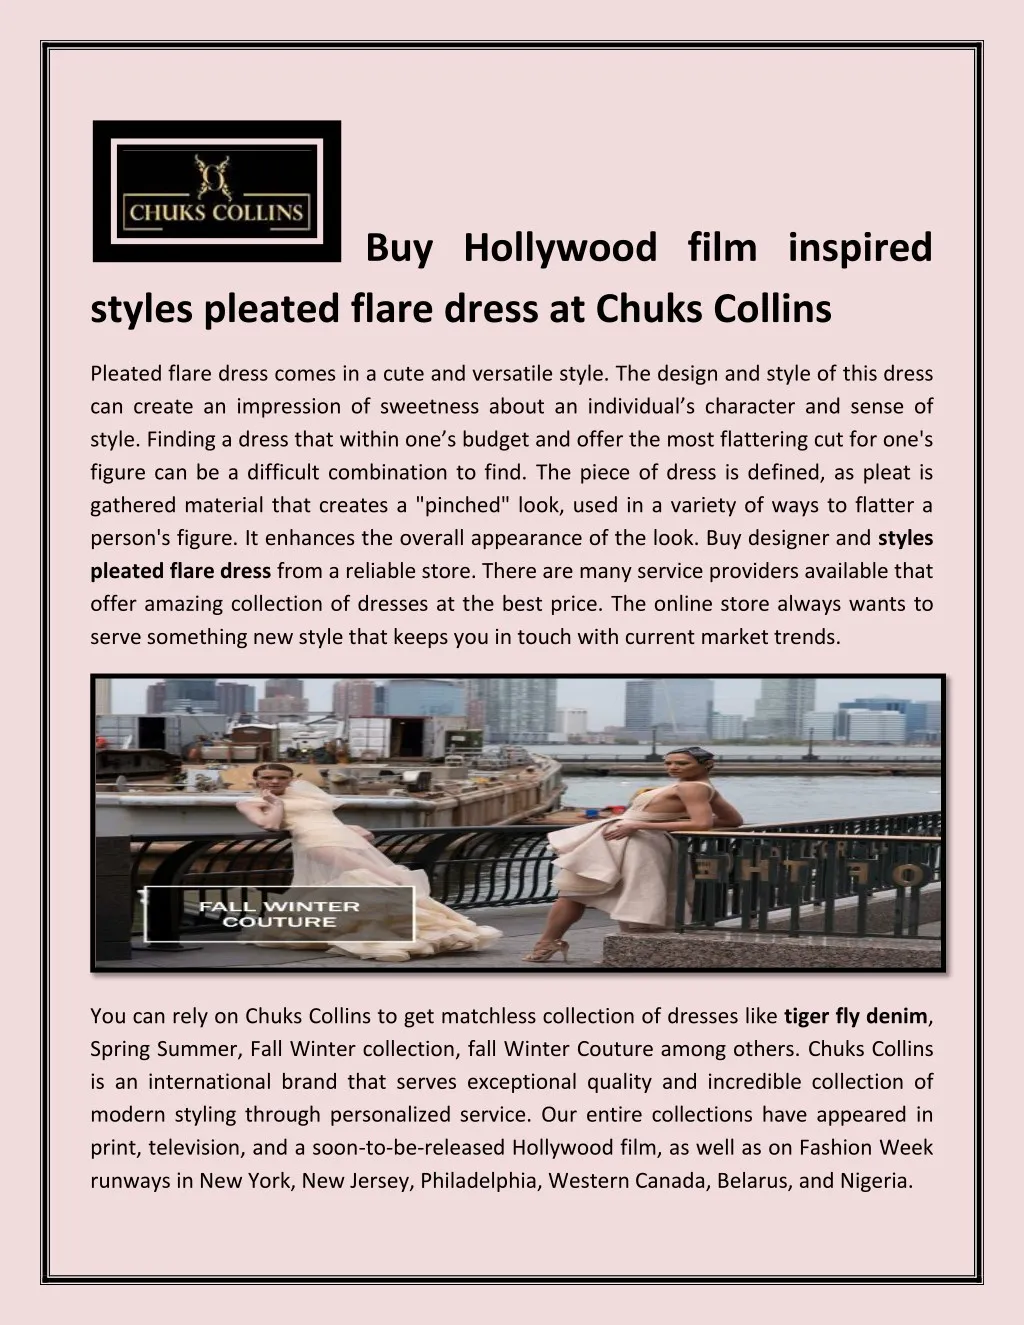 buy hollywood film inspired styles pleated flare